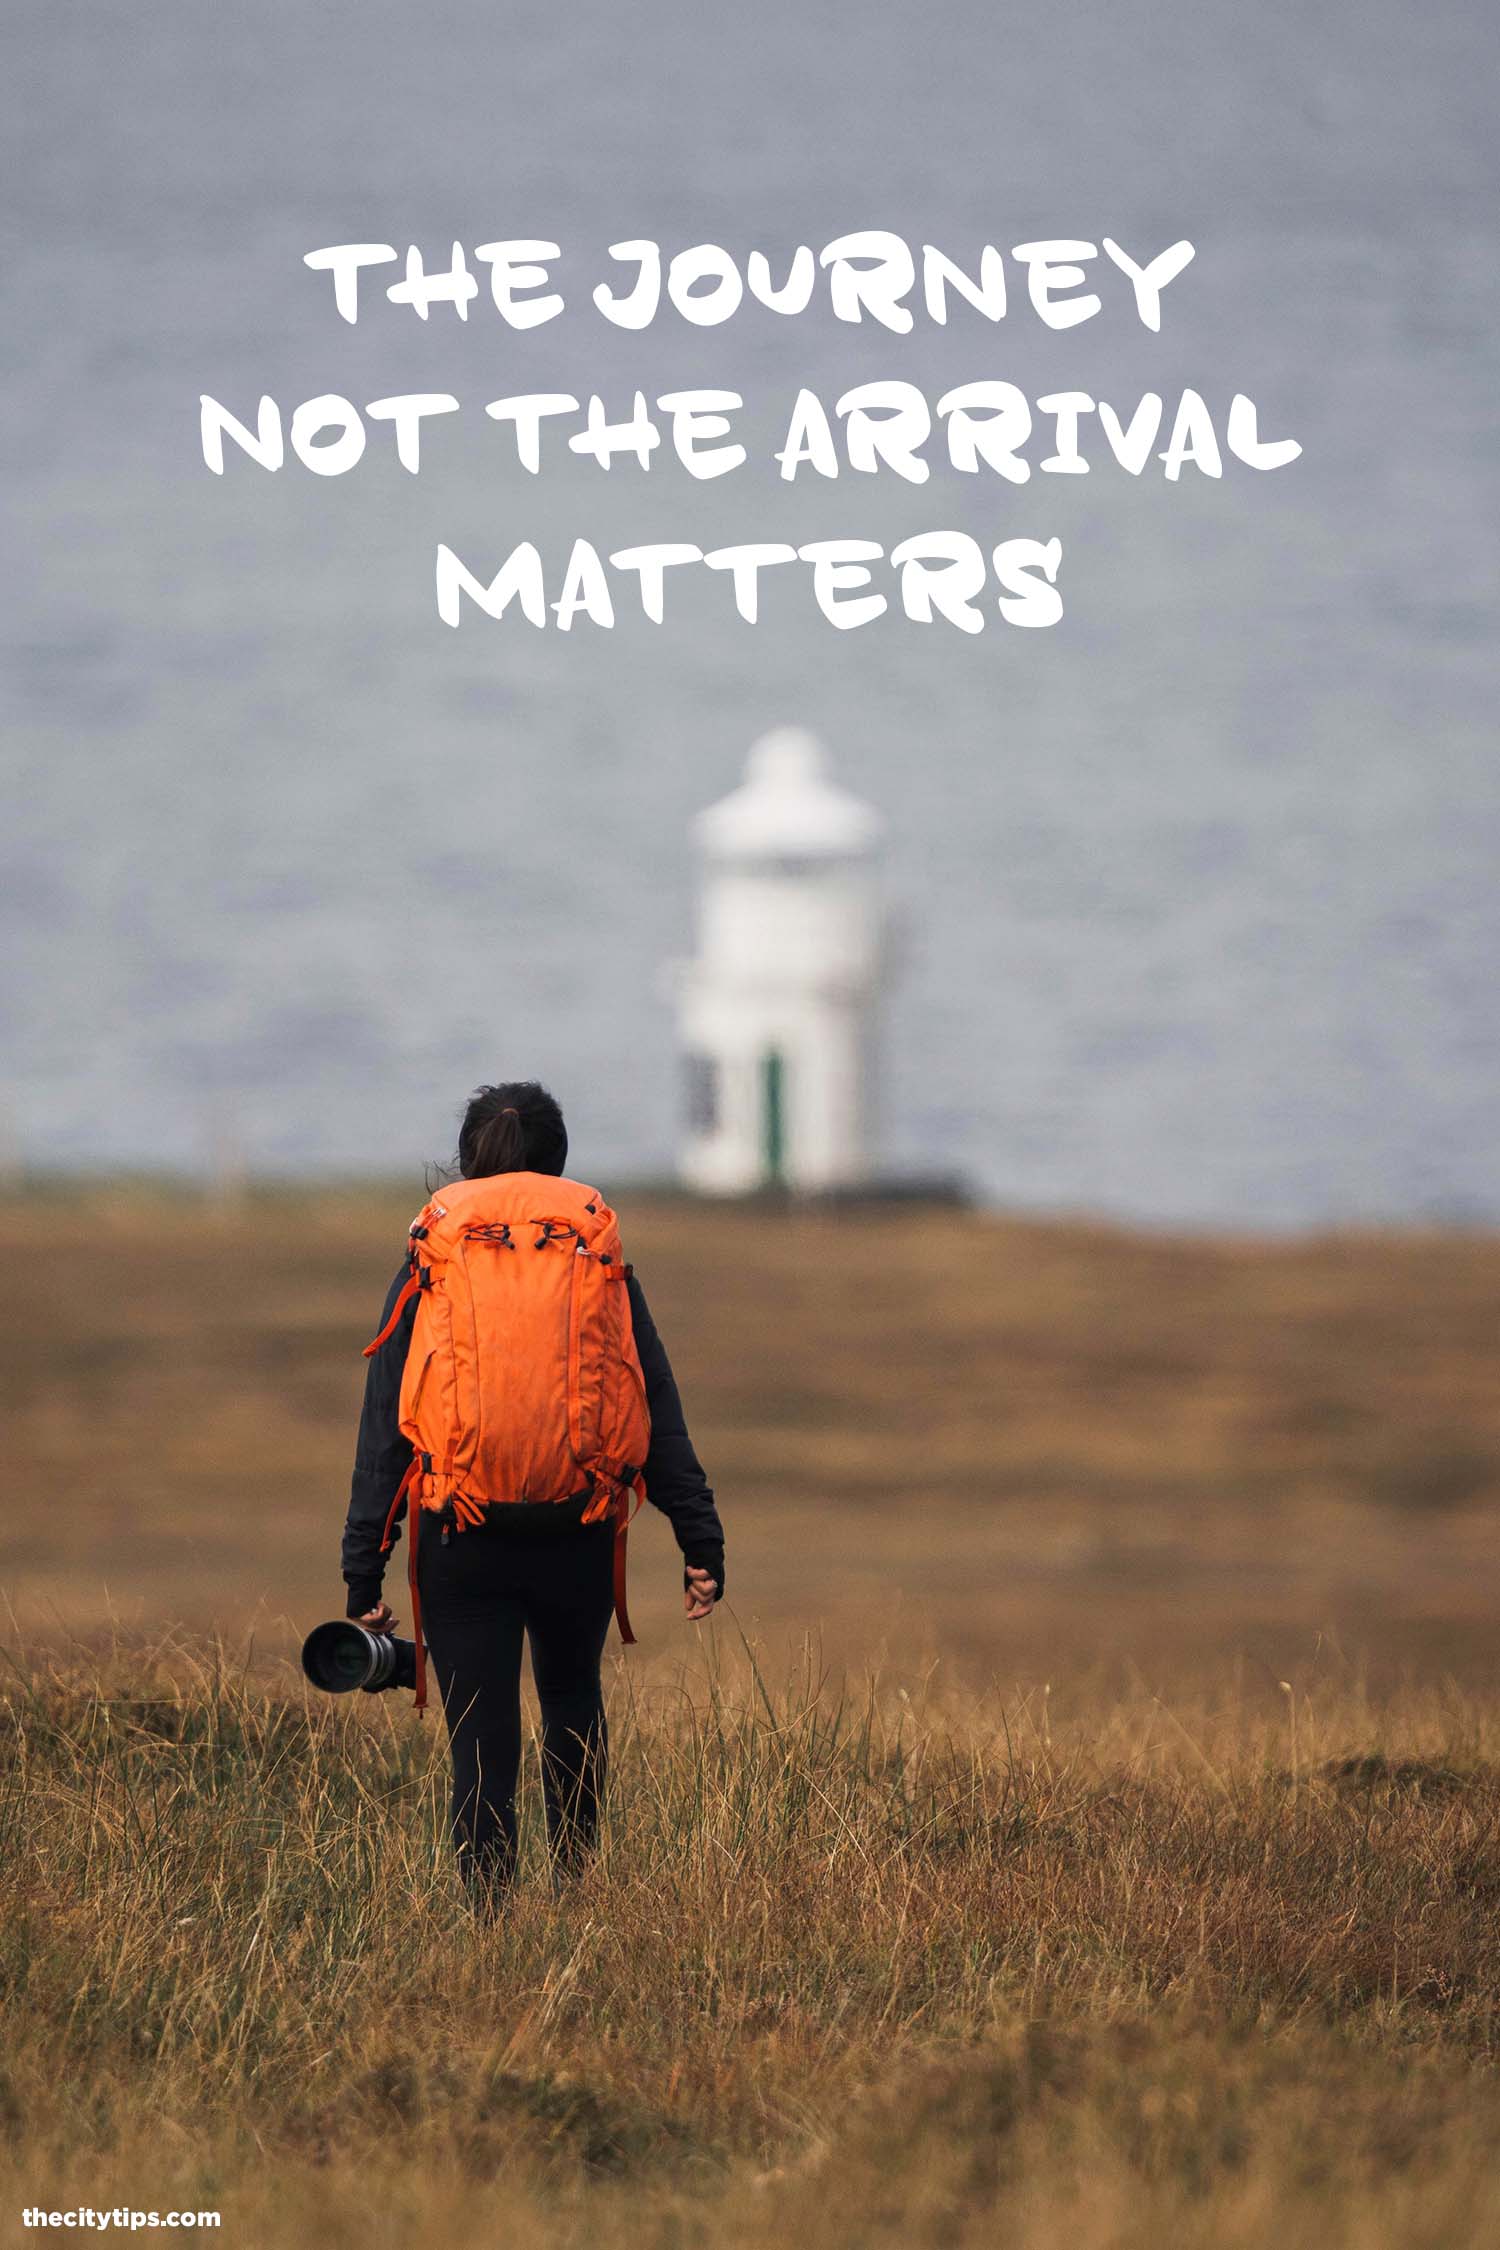 "The journey not the arrival matters." by T.S. Eliot